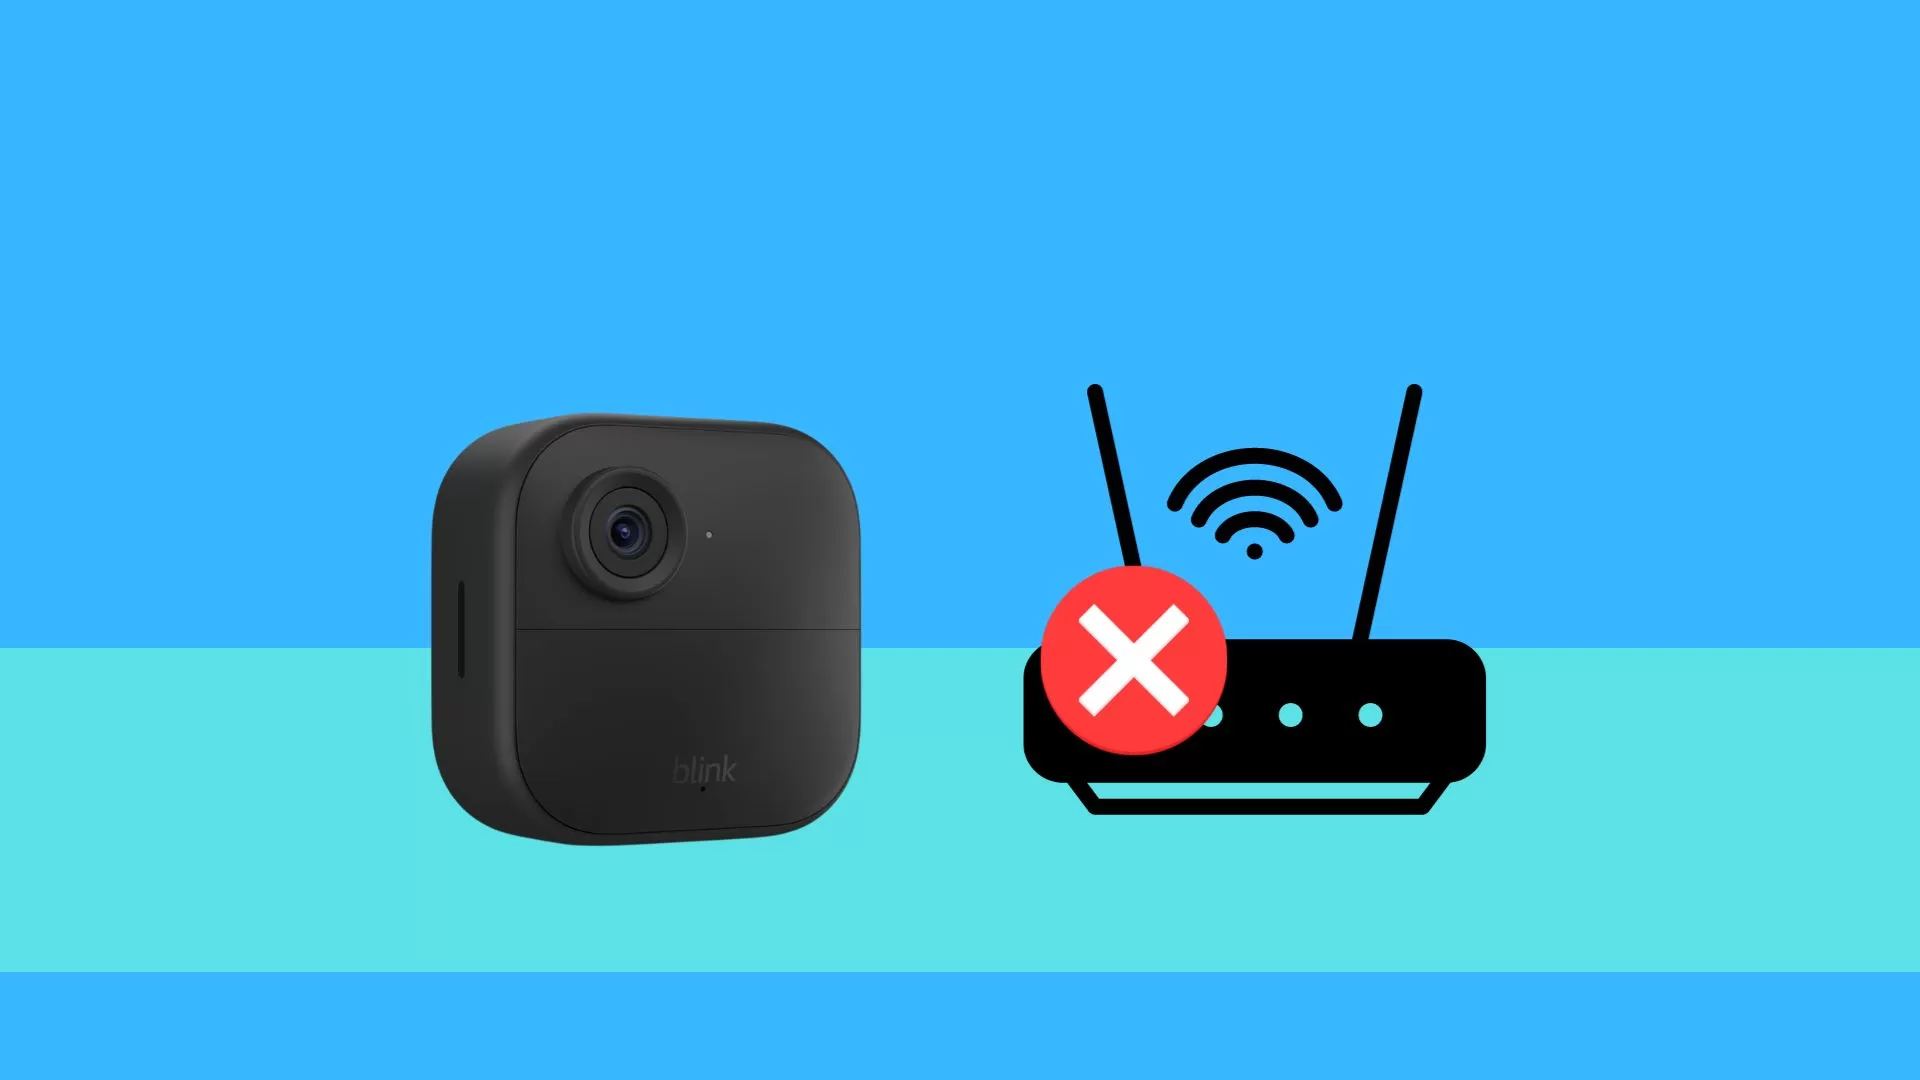 Blink Camera not connecting to WiFi